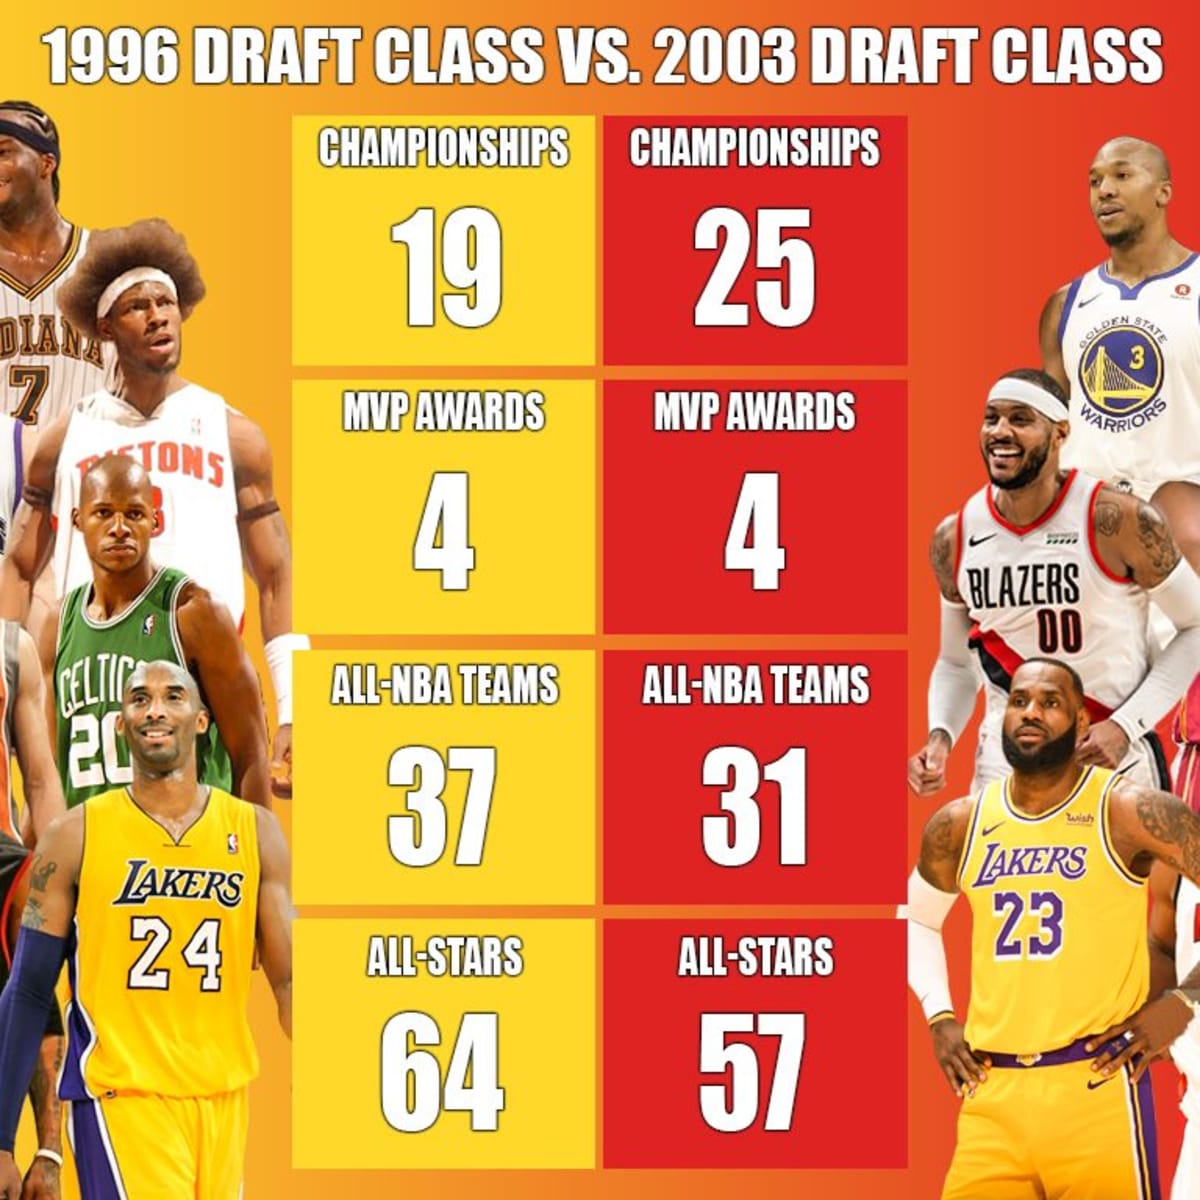 A Look Back At The Legendary 1996 NBA Draft